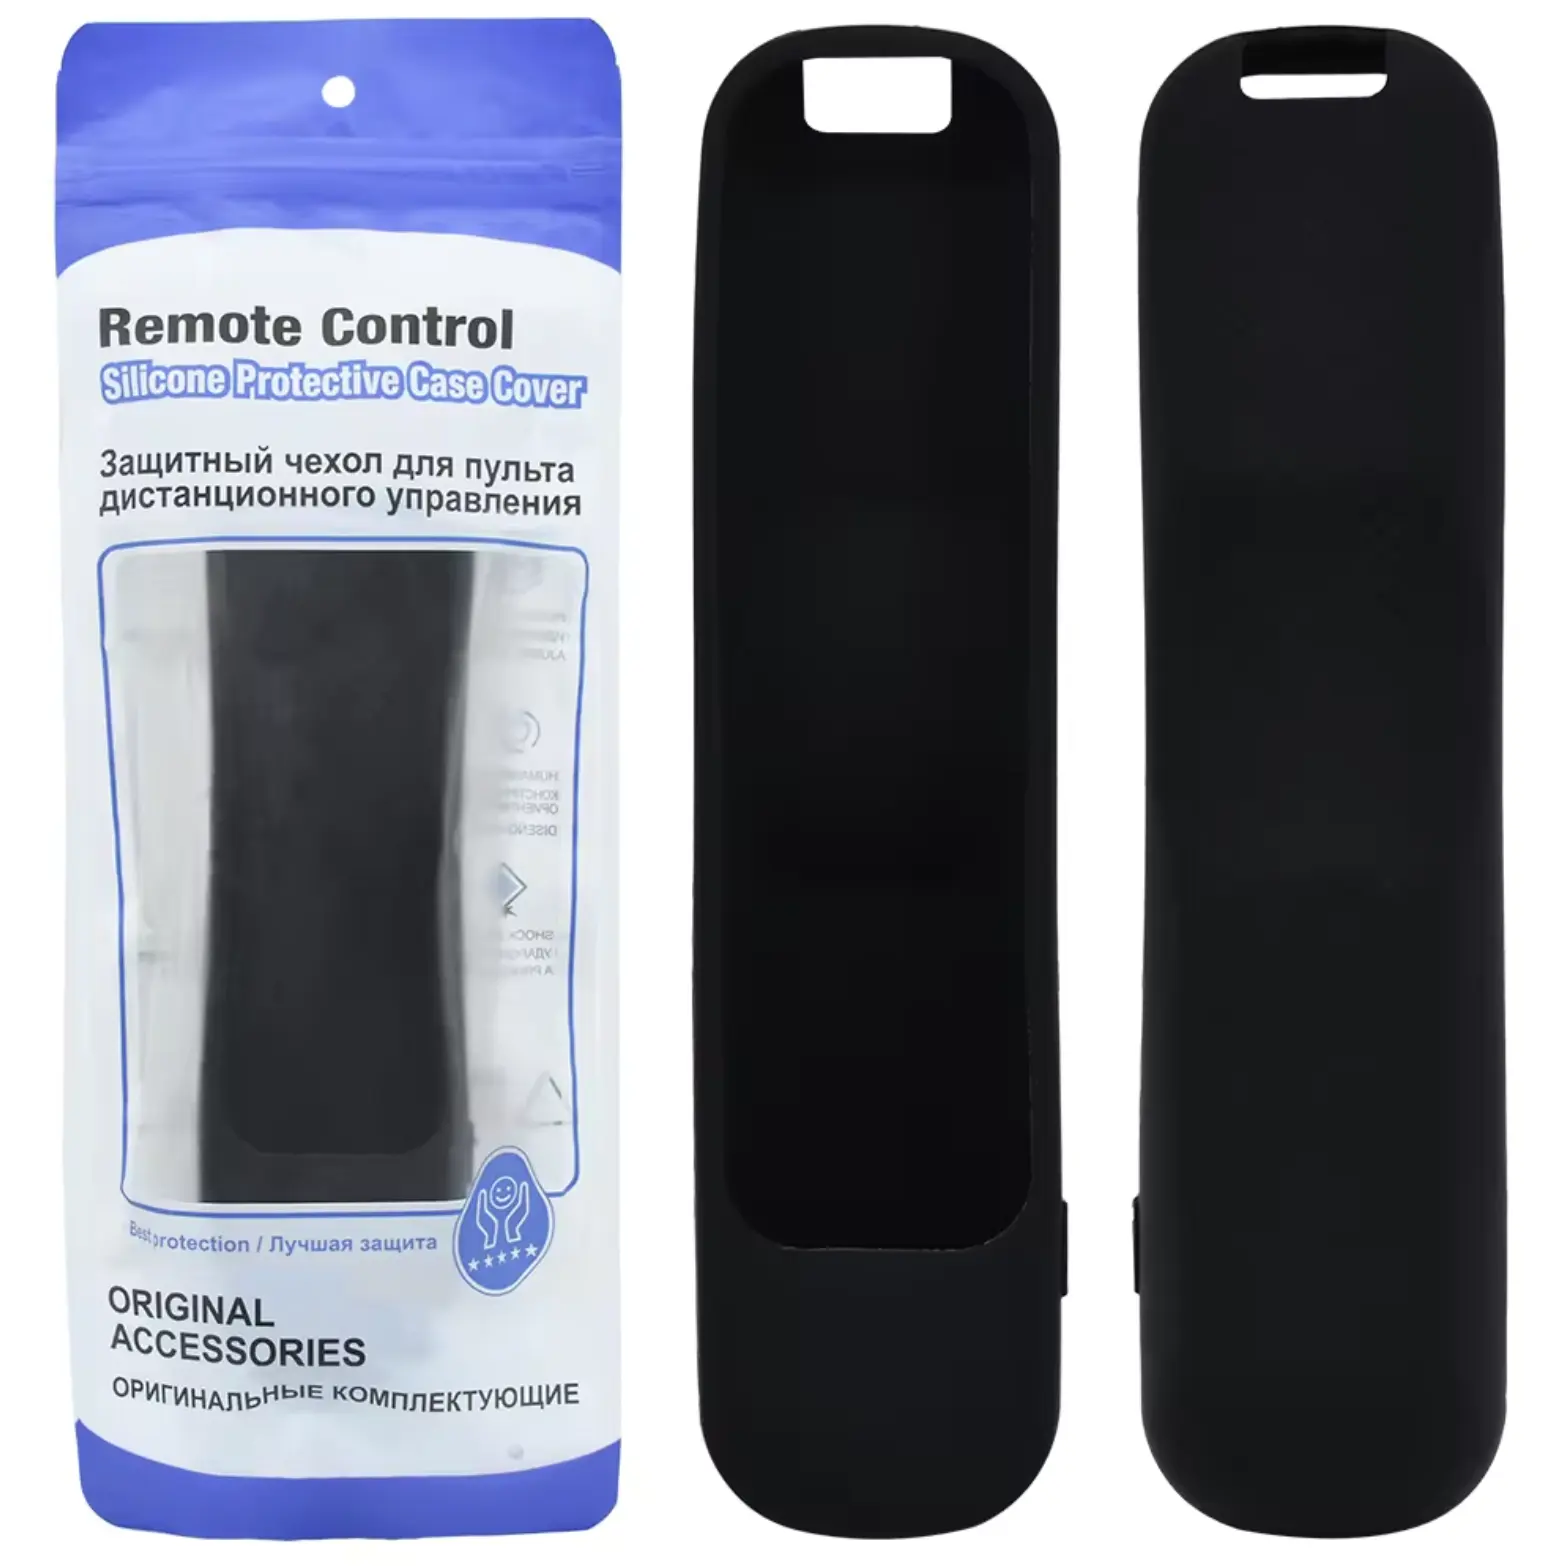 Protective Soft Silicone Case For L-G AN-MR21GC AN-MR21GA AN-MR21N Magic Remote Control Cover Shockproof Washable Remote